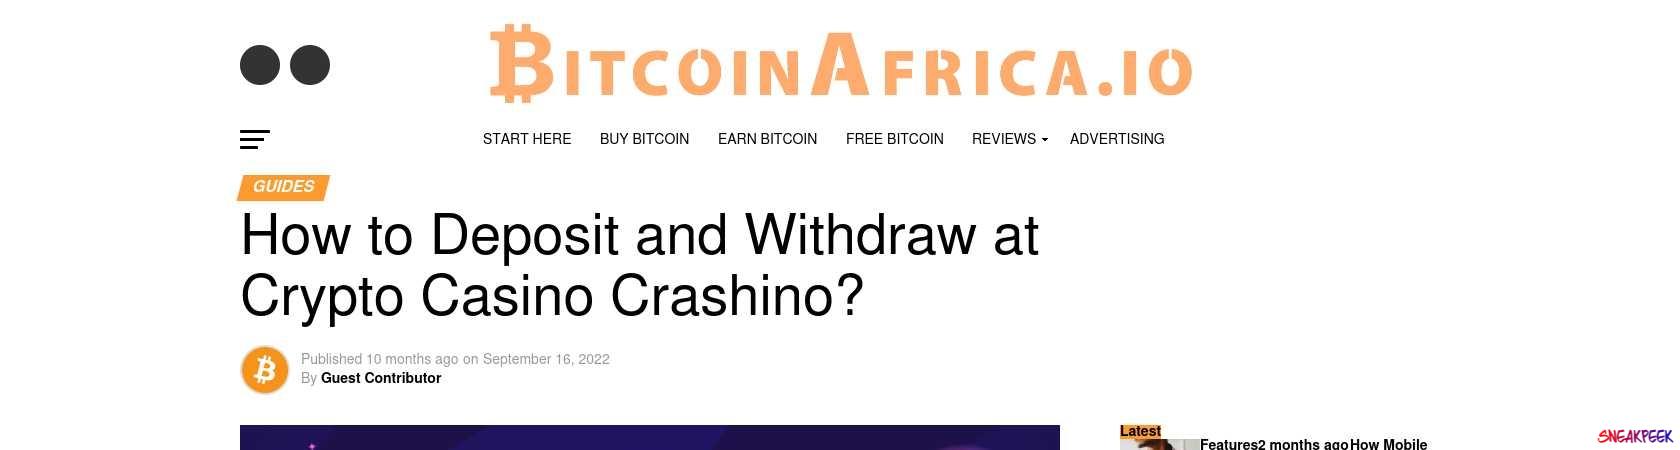 Read the full Article:  ⭲ How to Deposit and Withdraw at Crypto Casino Crashino?